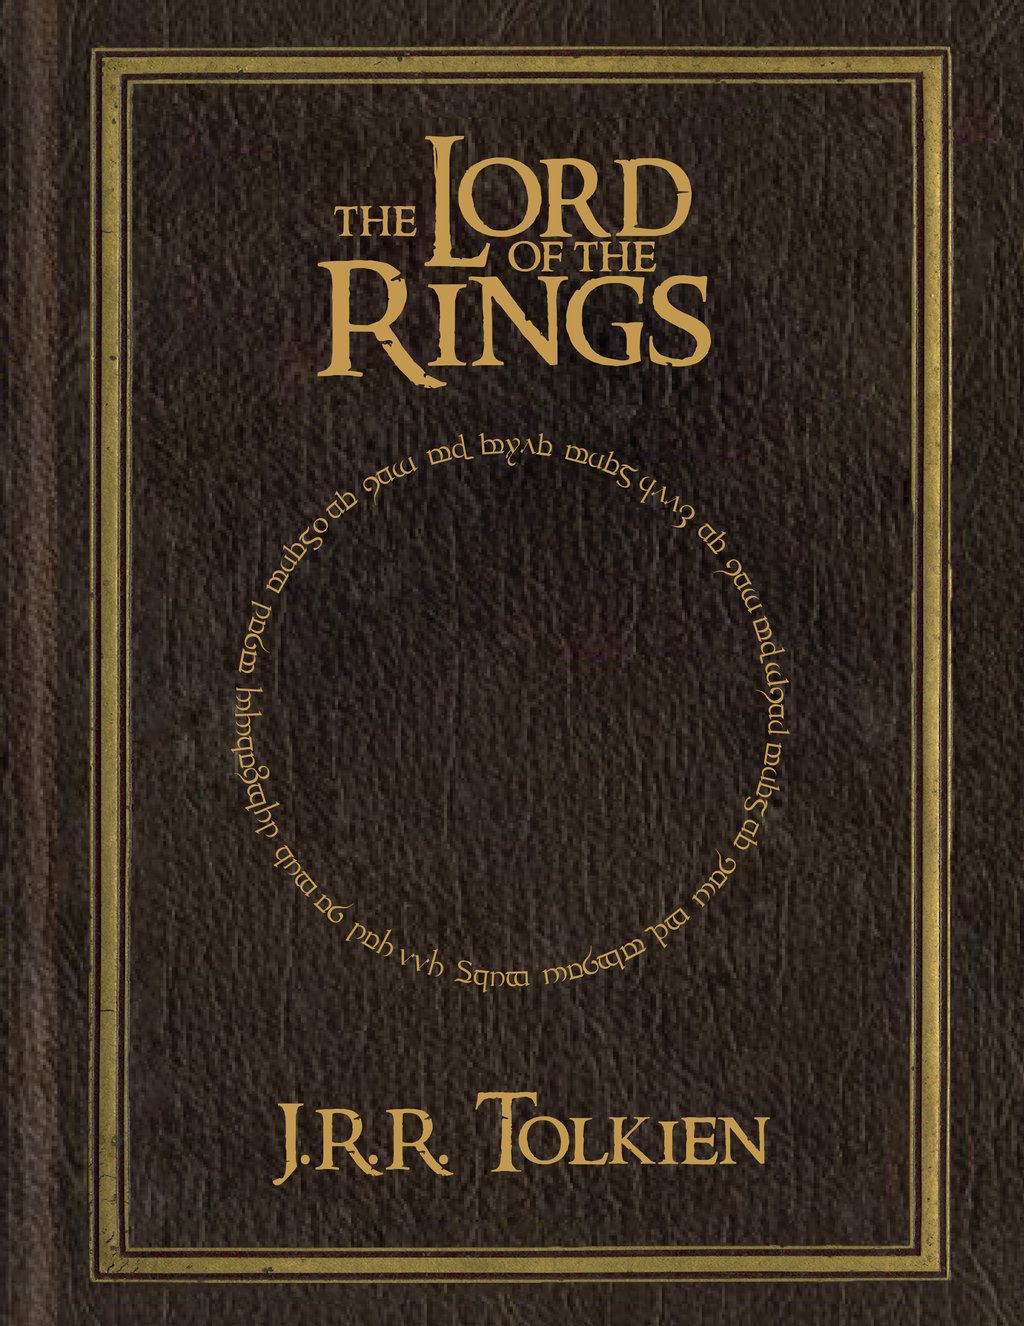 JRR Tolkien Reads The Lord of the Rings | Collider